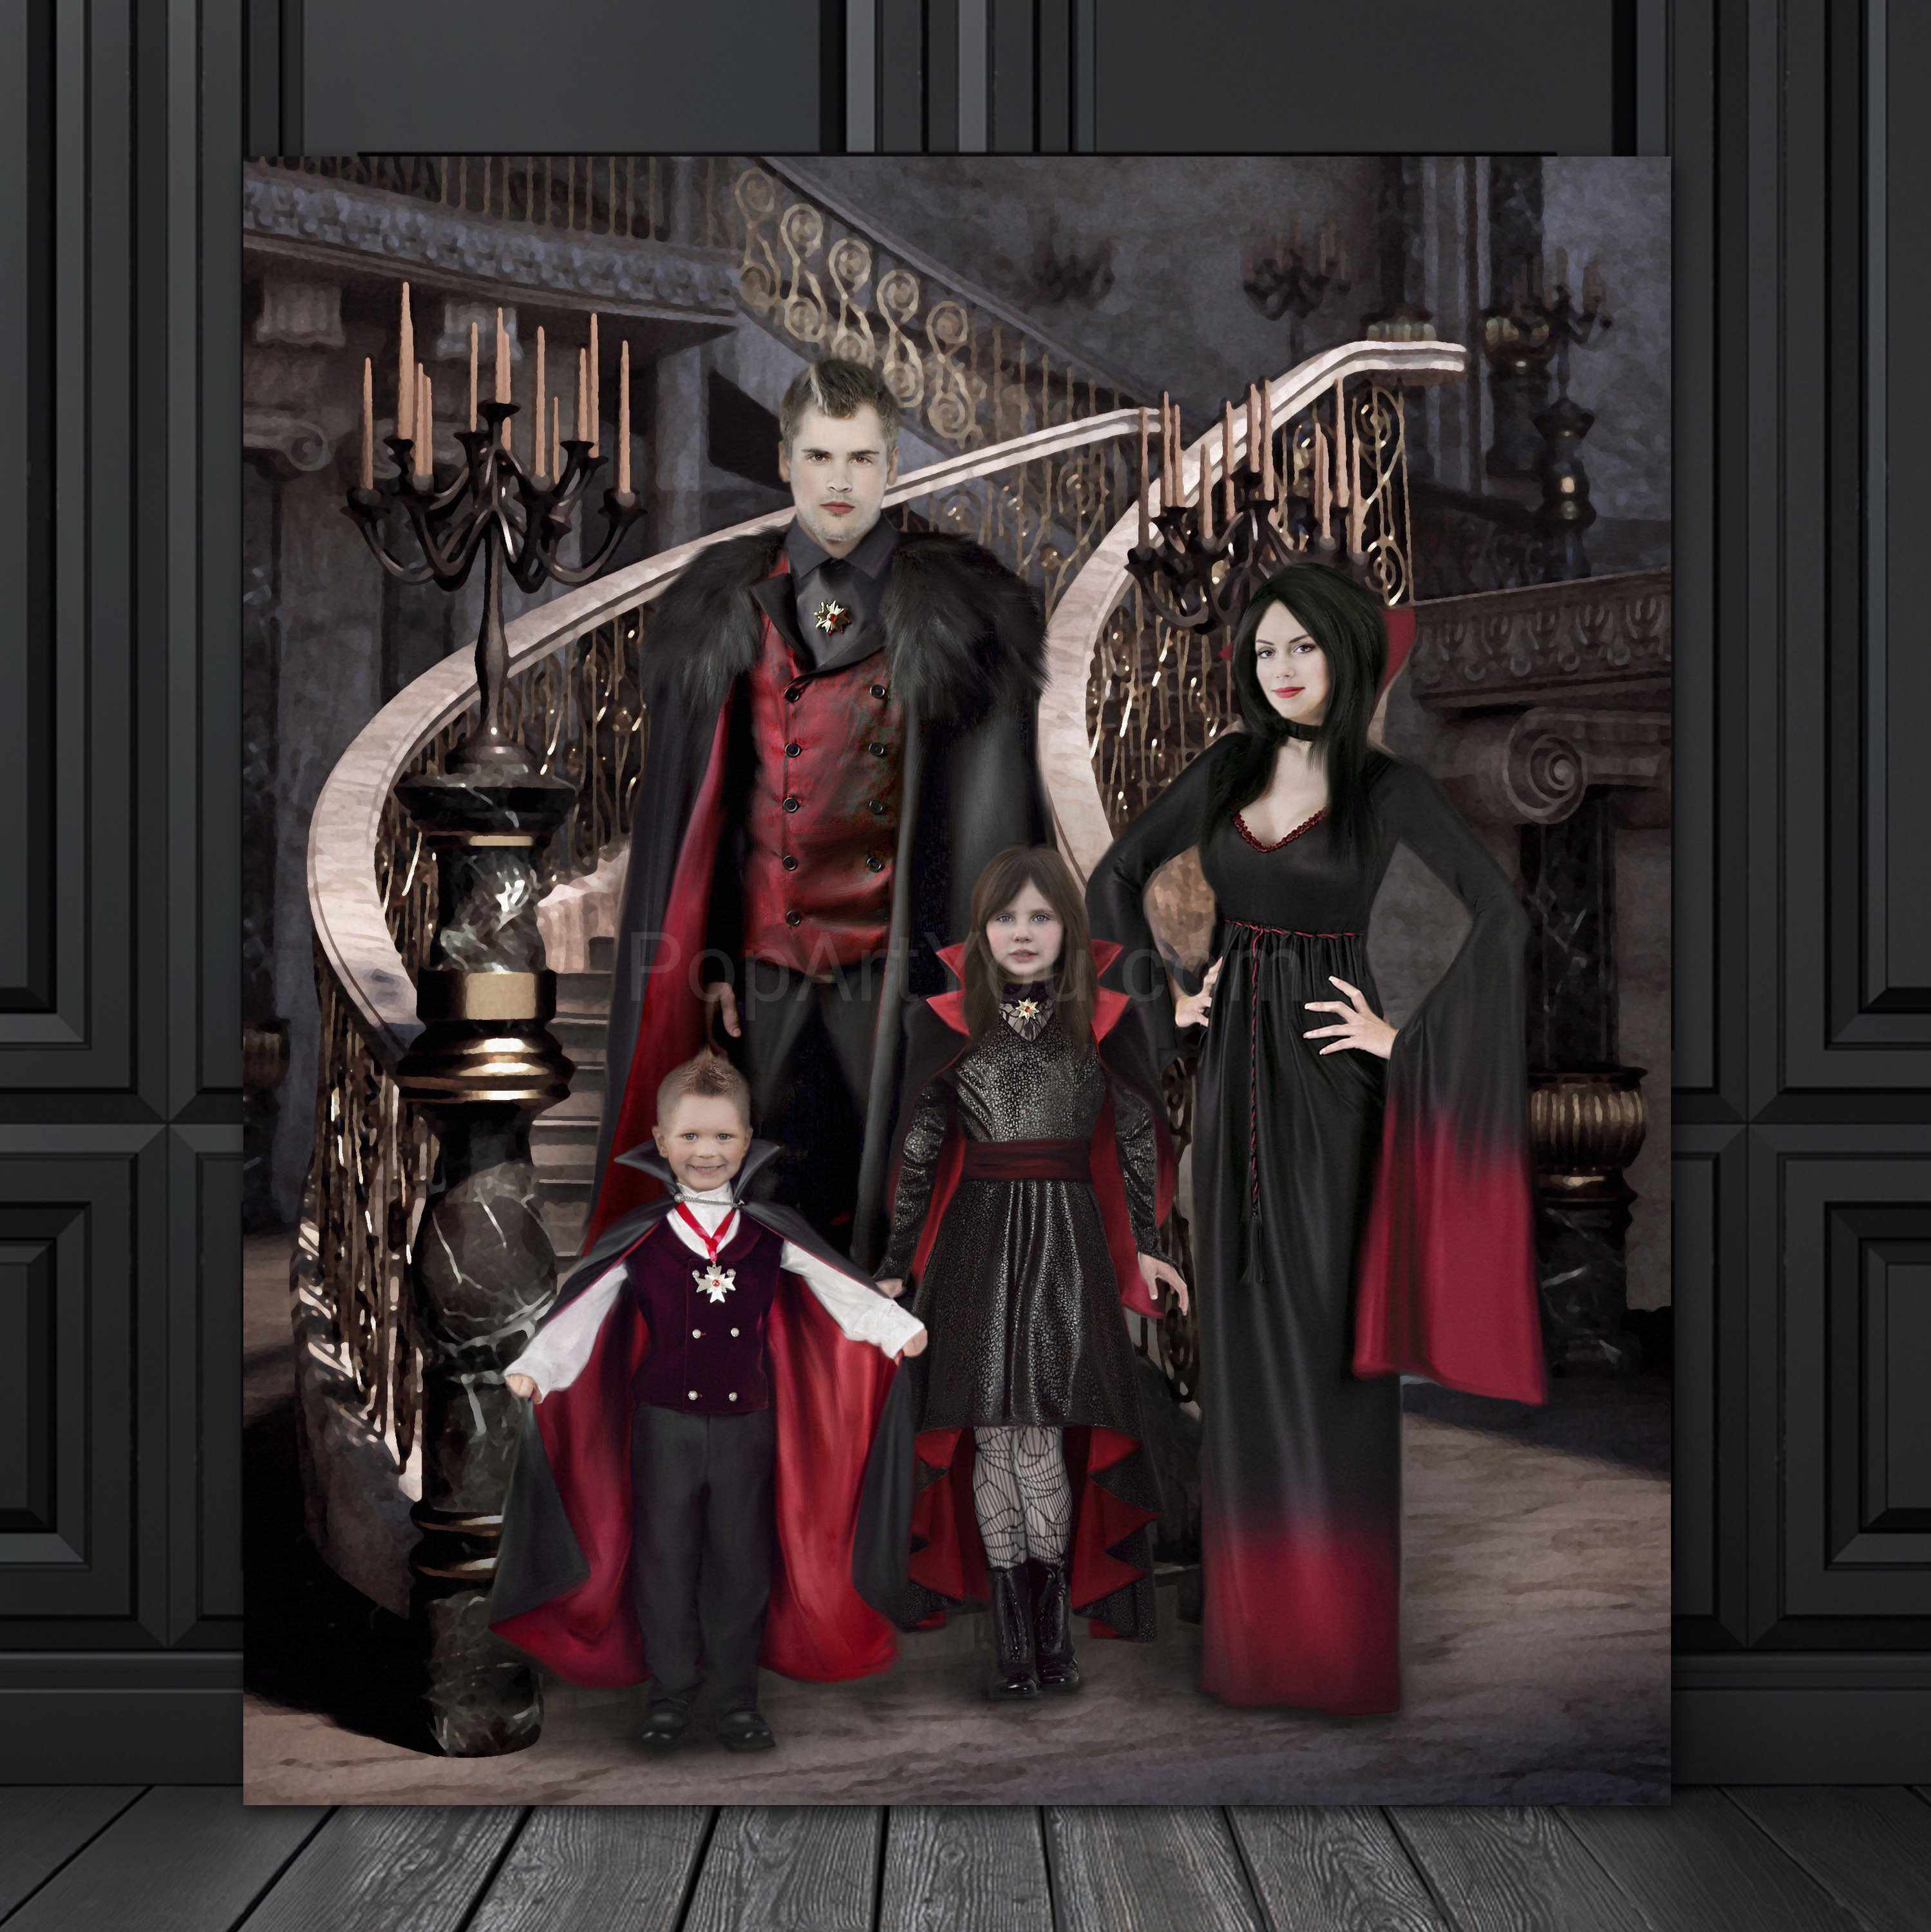 Portrait of a vampire family dressed in historical clothes stands on a black wooden floor near a black wall